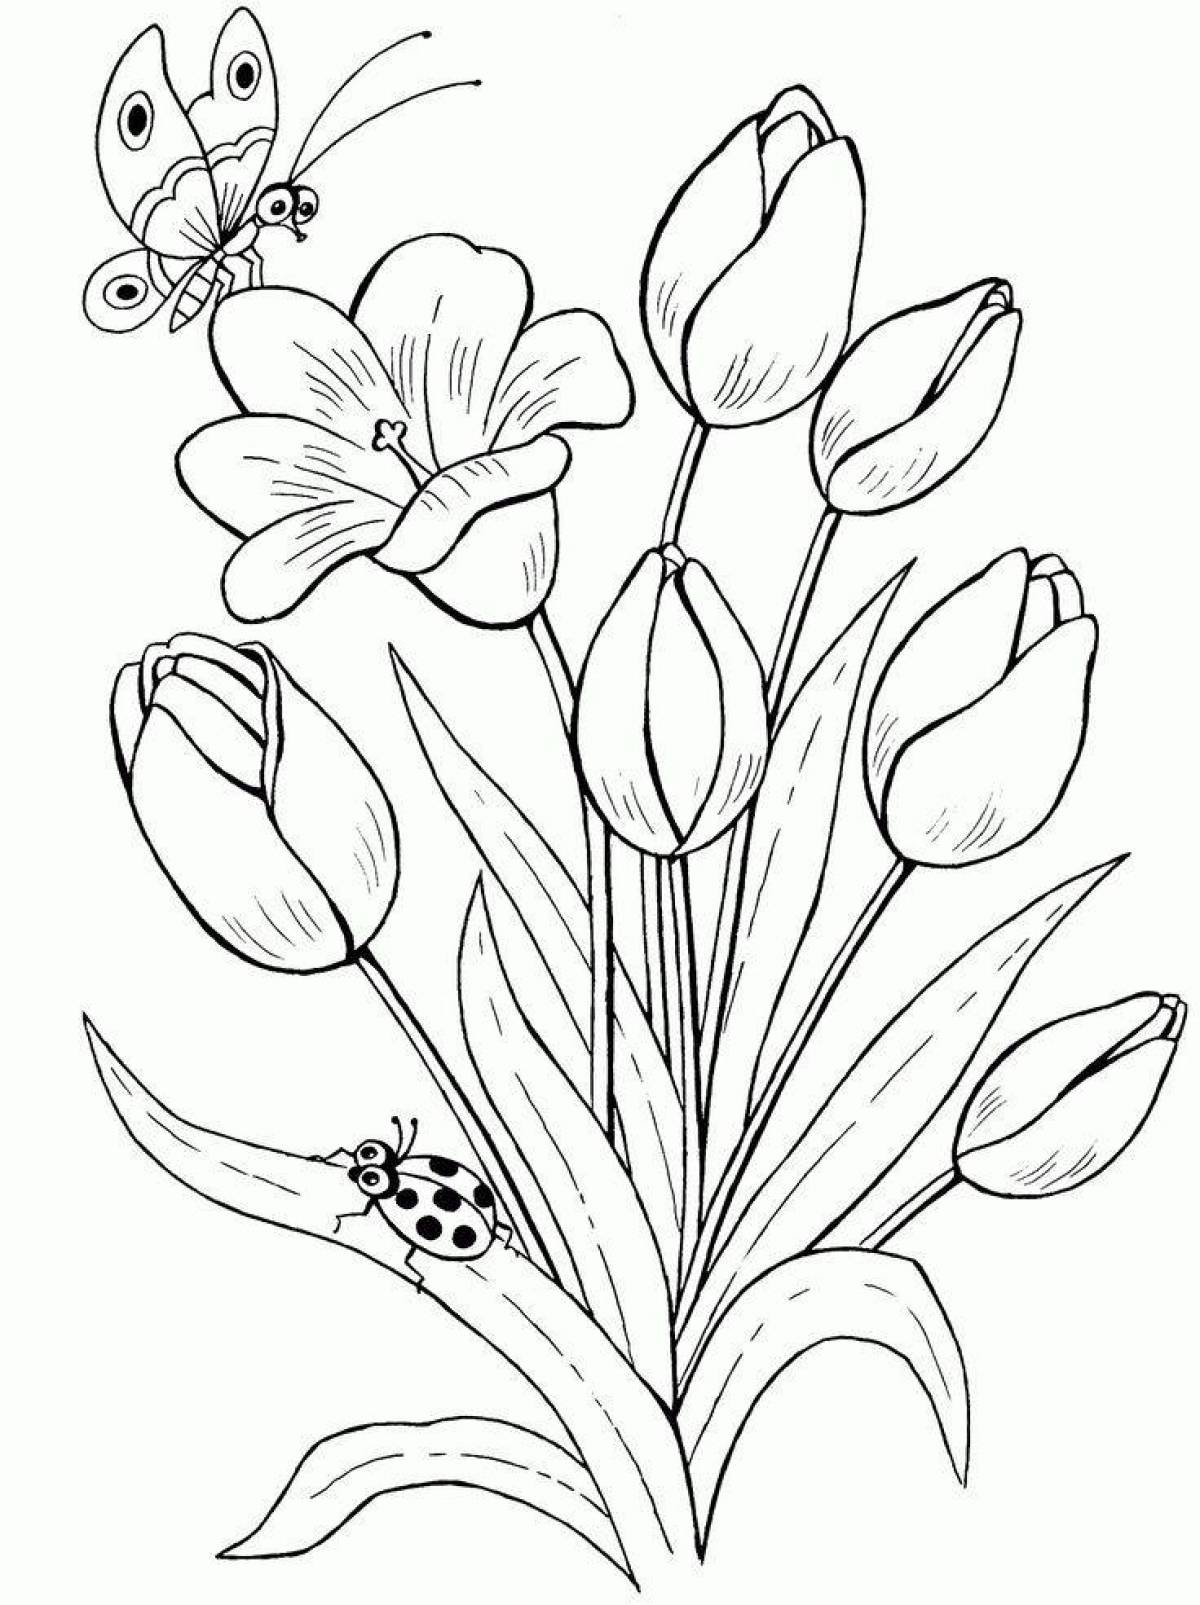 Exotic flower coloring pages for children 6-7 years old